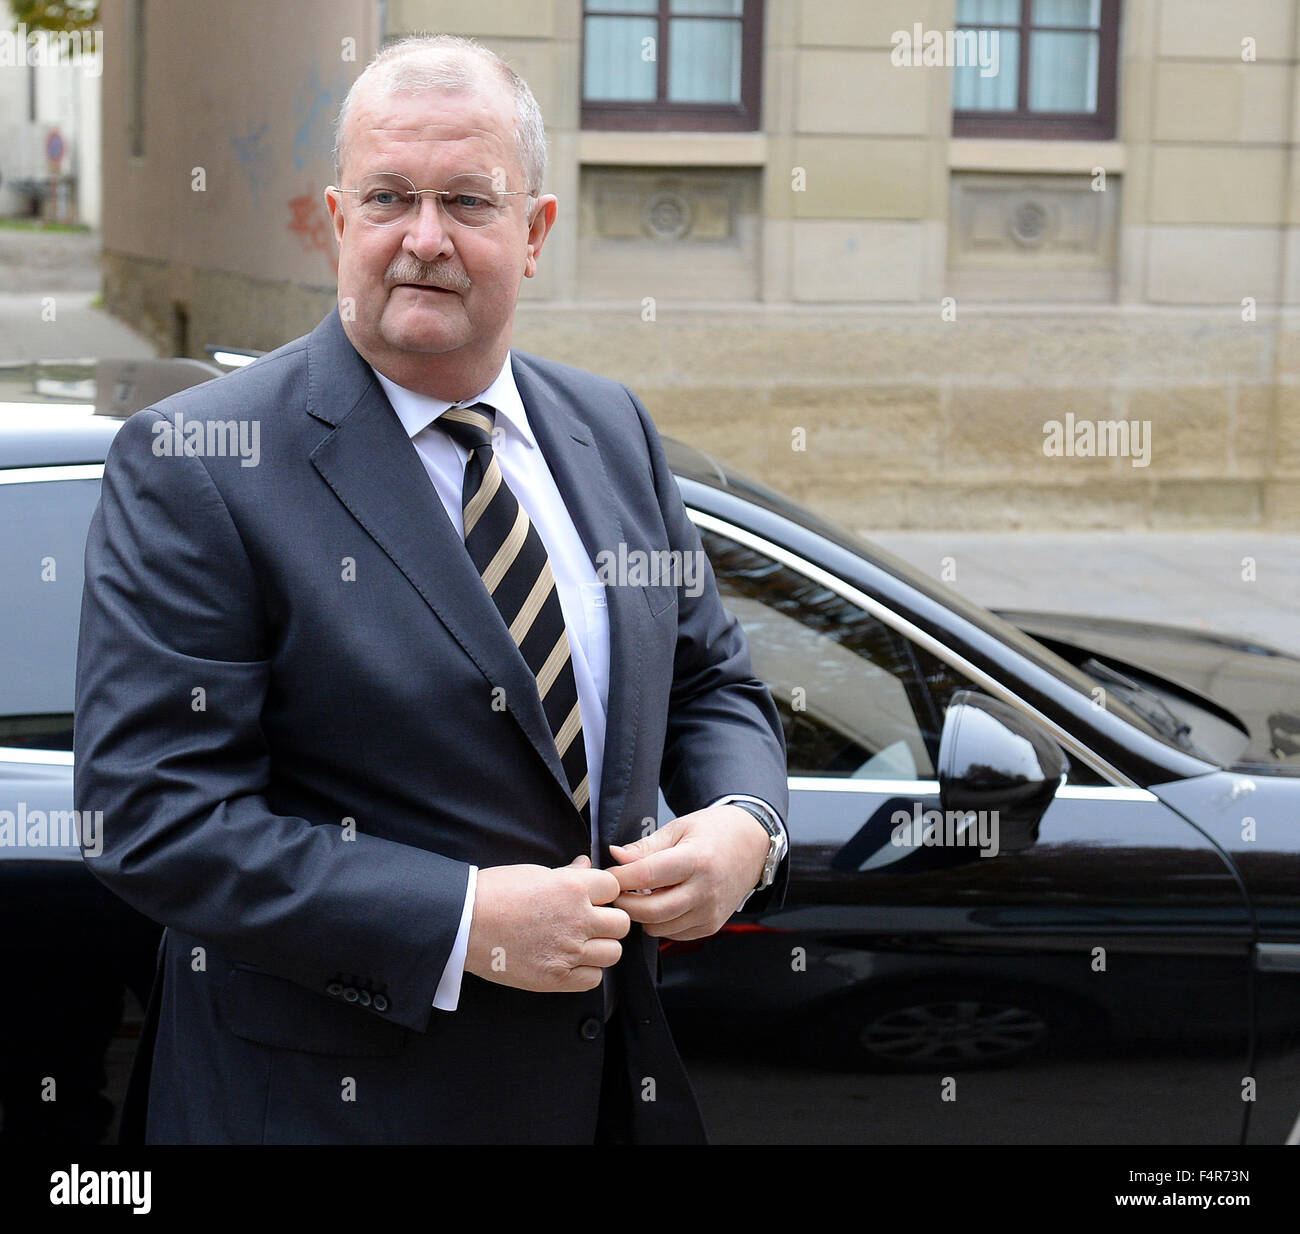 Stuttgart, Germany. 22nd Oct, 2015. Former CEO of Porsche Automobil Holding SE, Wendelin Wiedeking, gets out of a Porsche Panamera on his way to trial in the regional court in Stuttgart, Germany, 22 October 2015. The former head of Porsche is being accused in connection with the planned but unsuccessful takeover of VW market manipulation. Photo: BENRD WEISSBROD/dpa/Alamy Live News Stock Photo